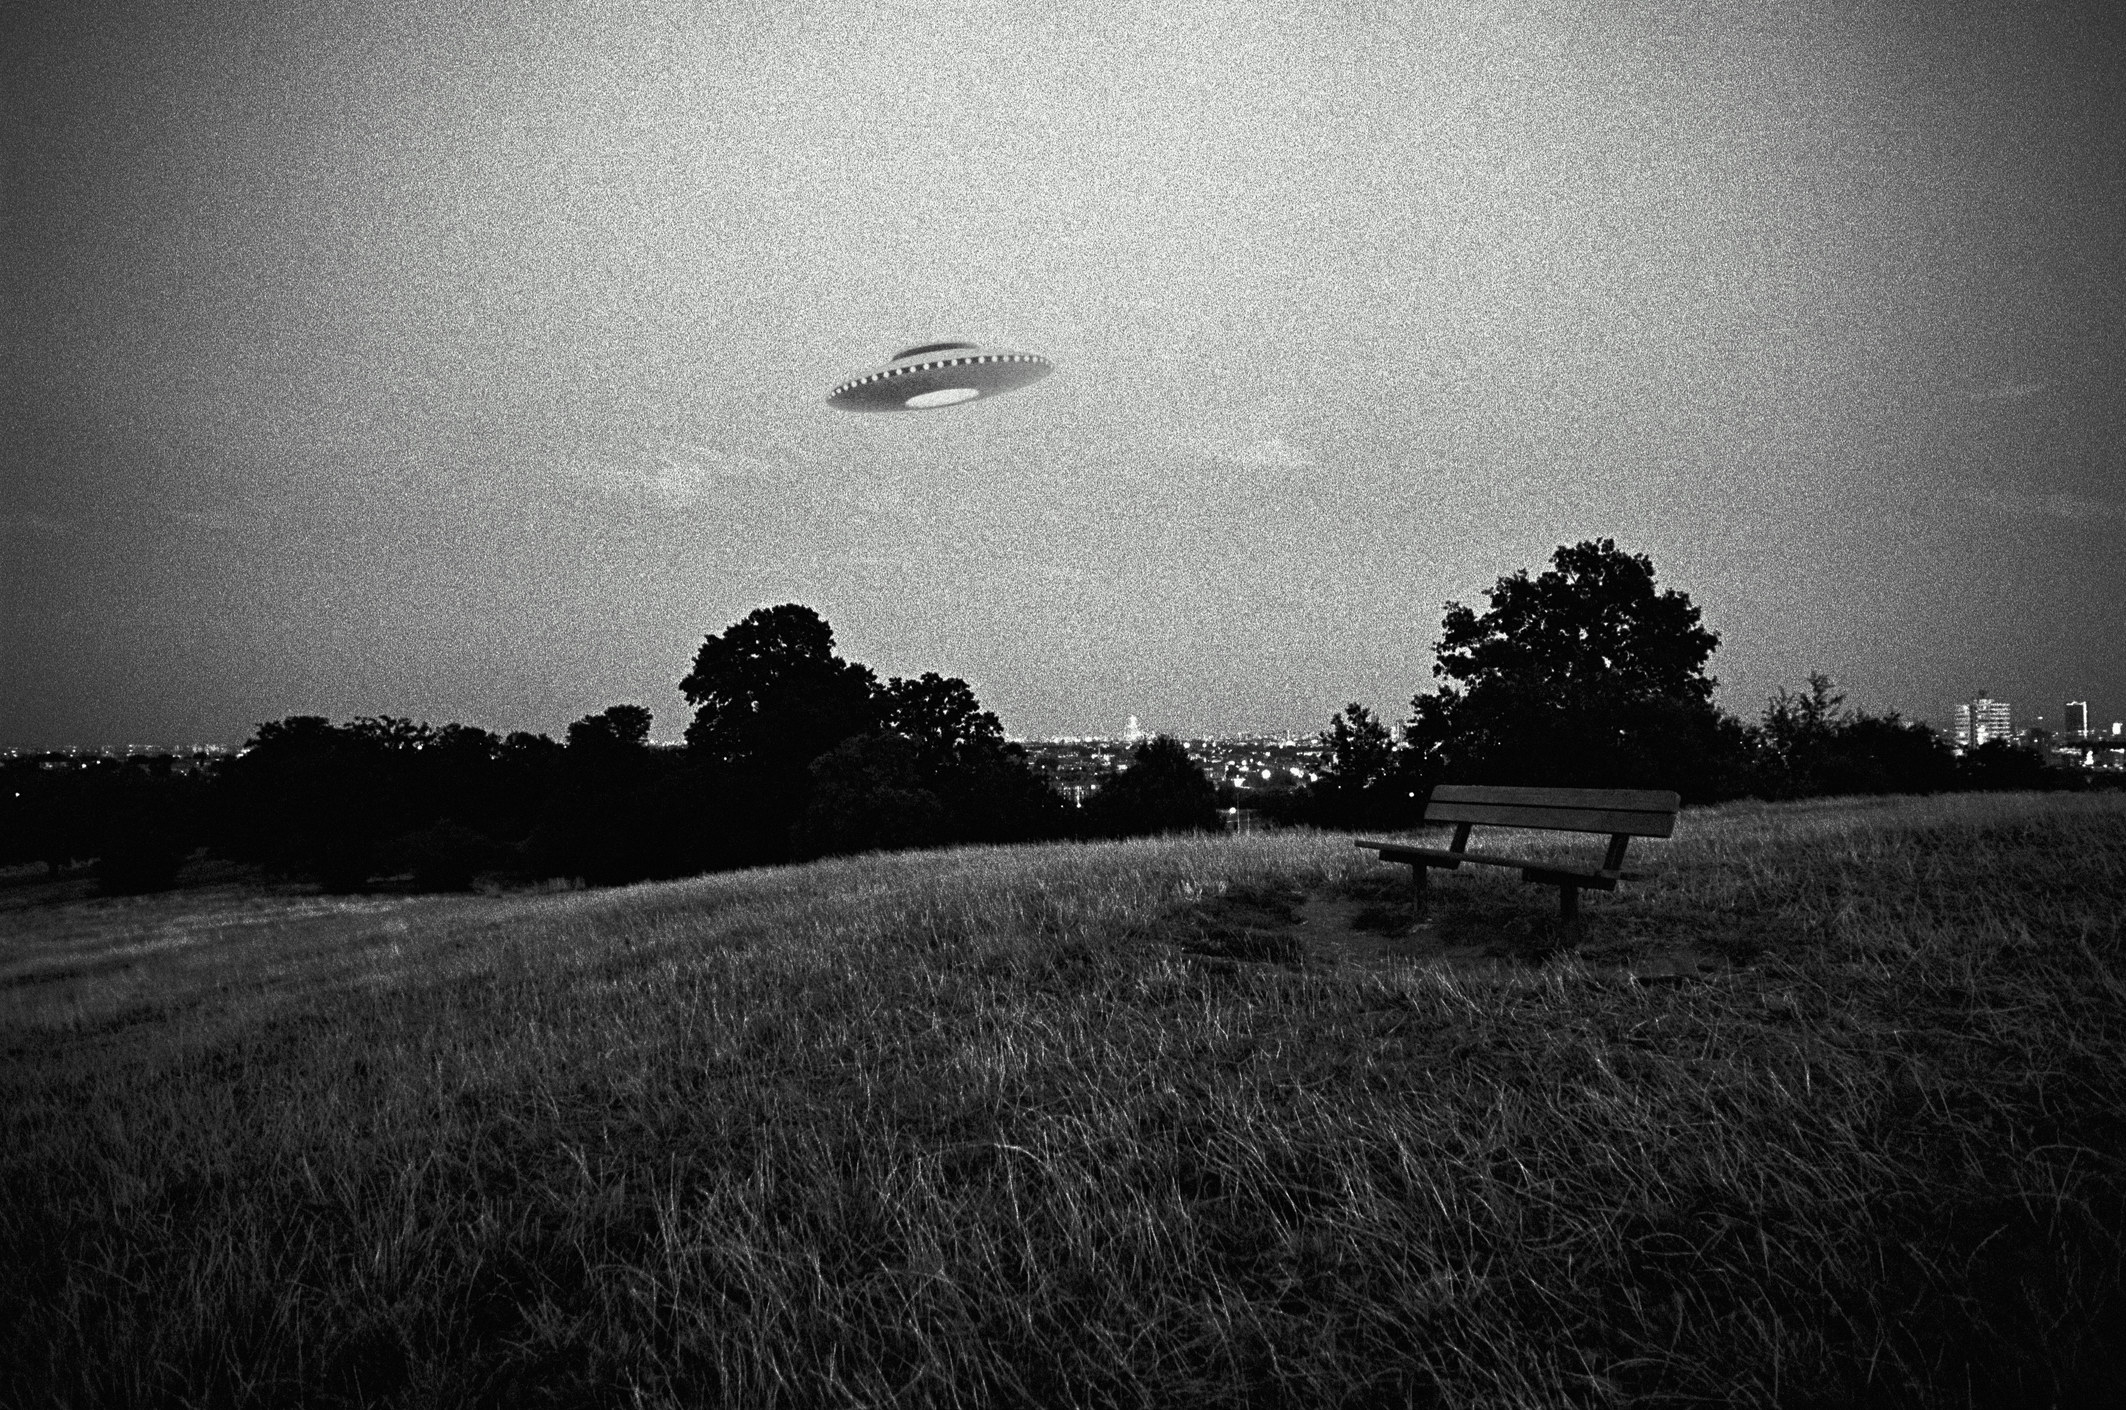 ufo hovering over a field